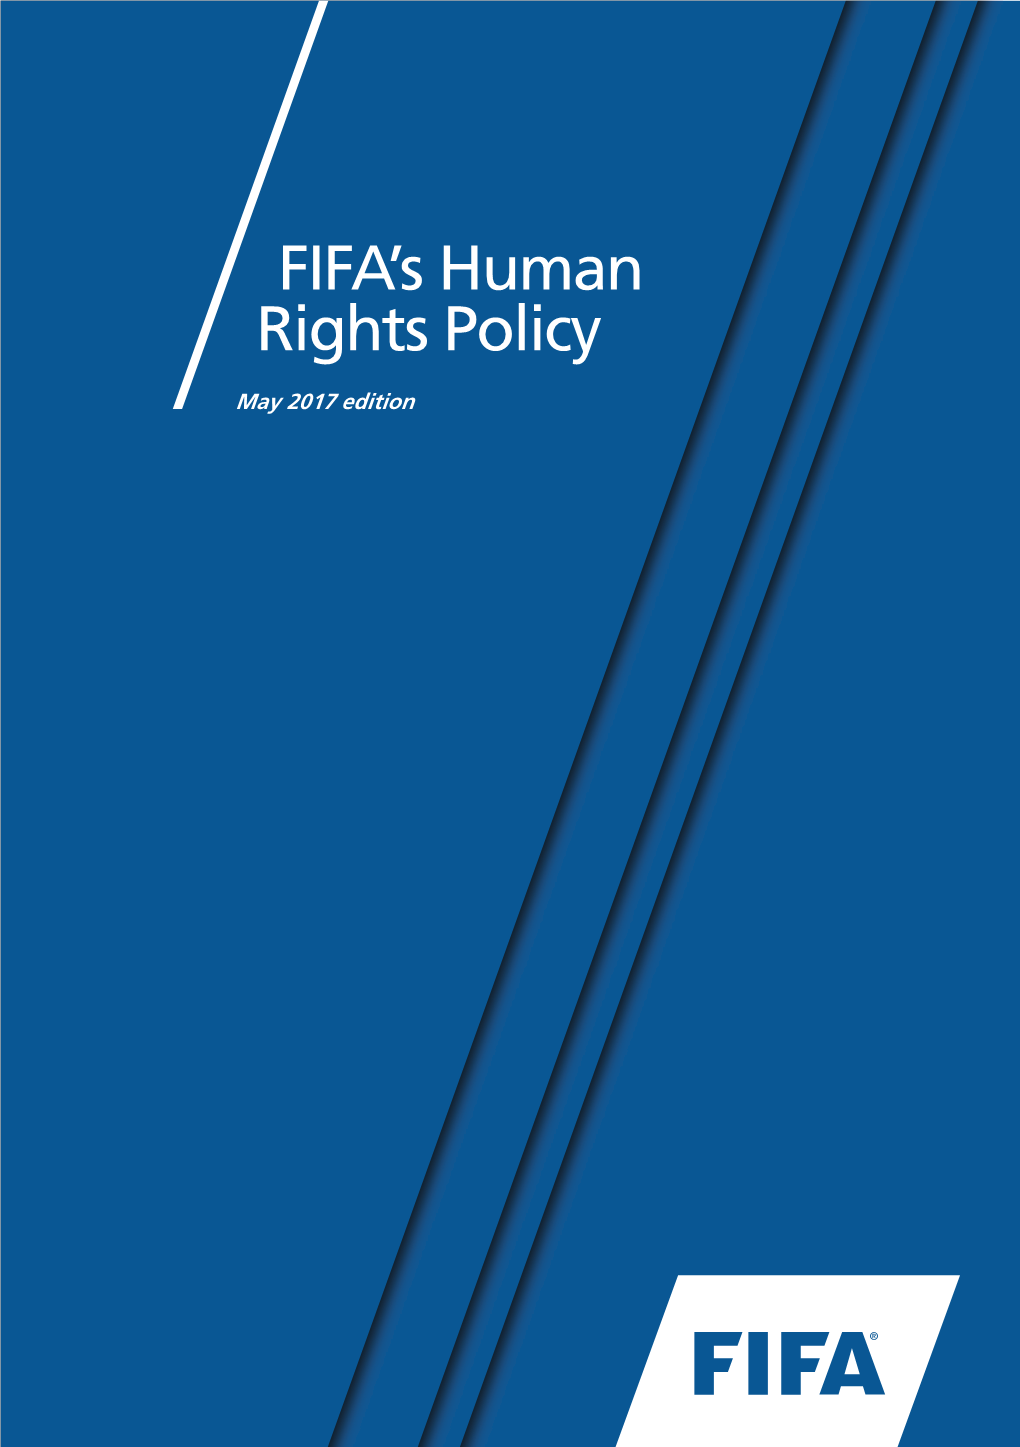 FIFA's Human Rights Policy